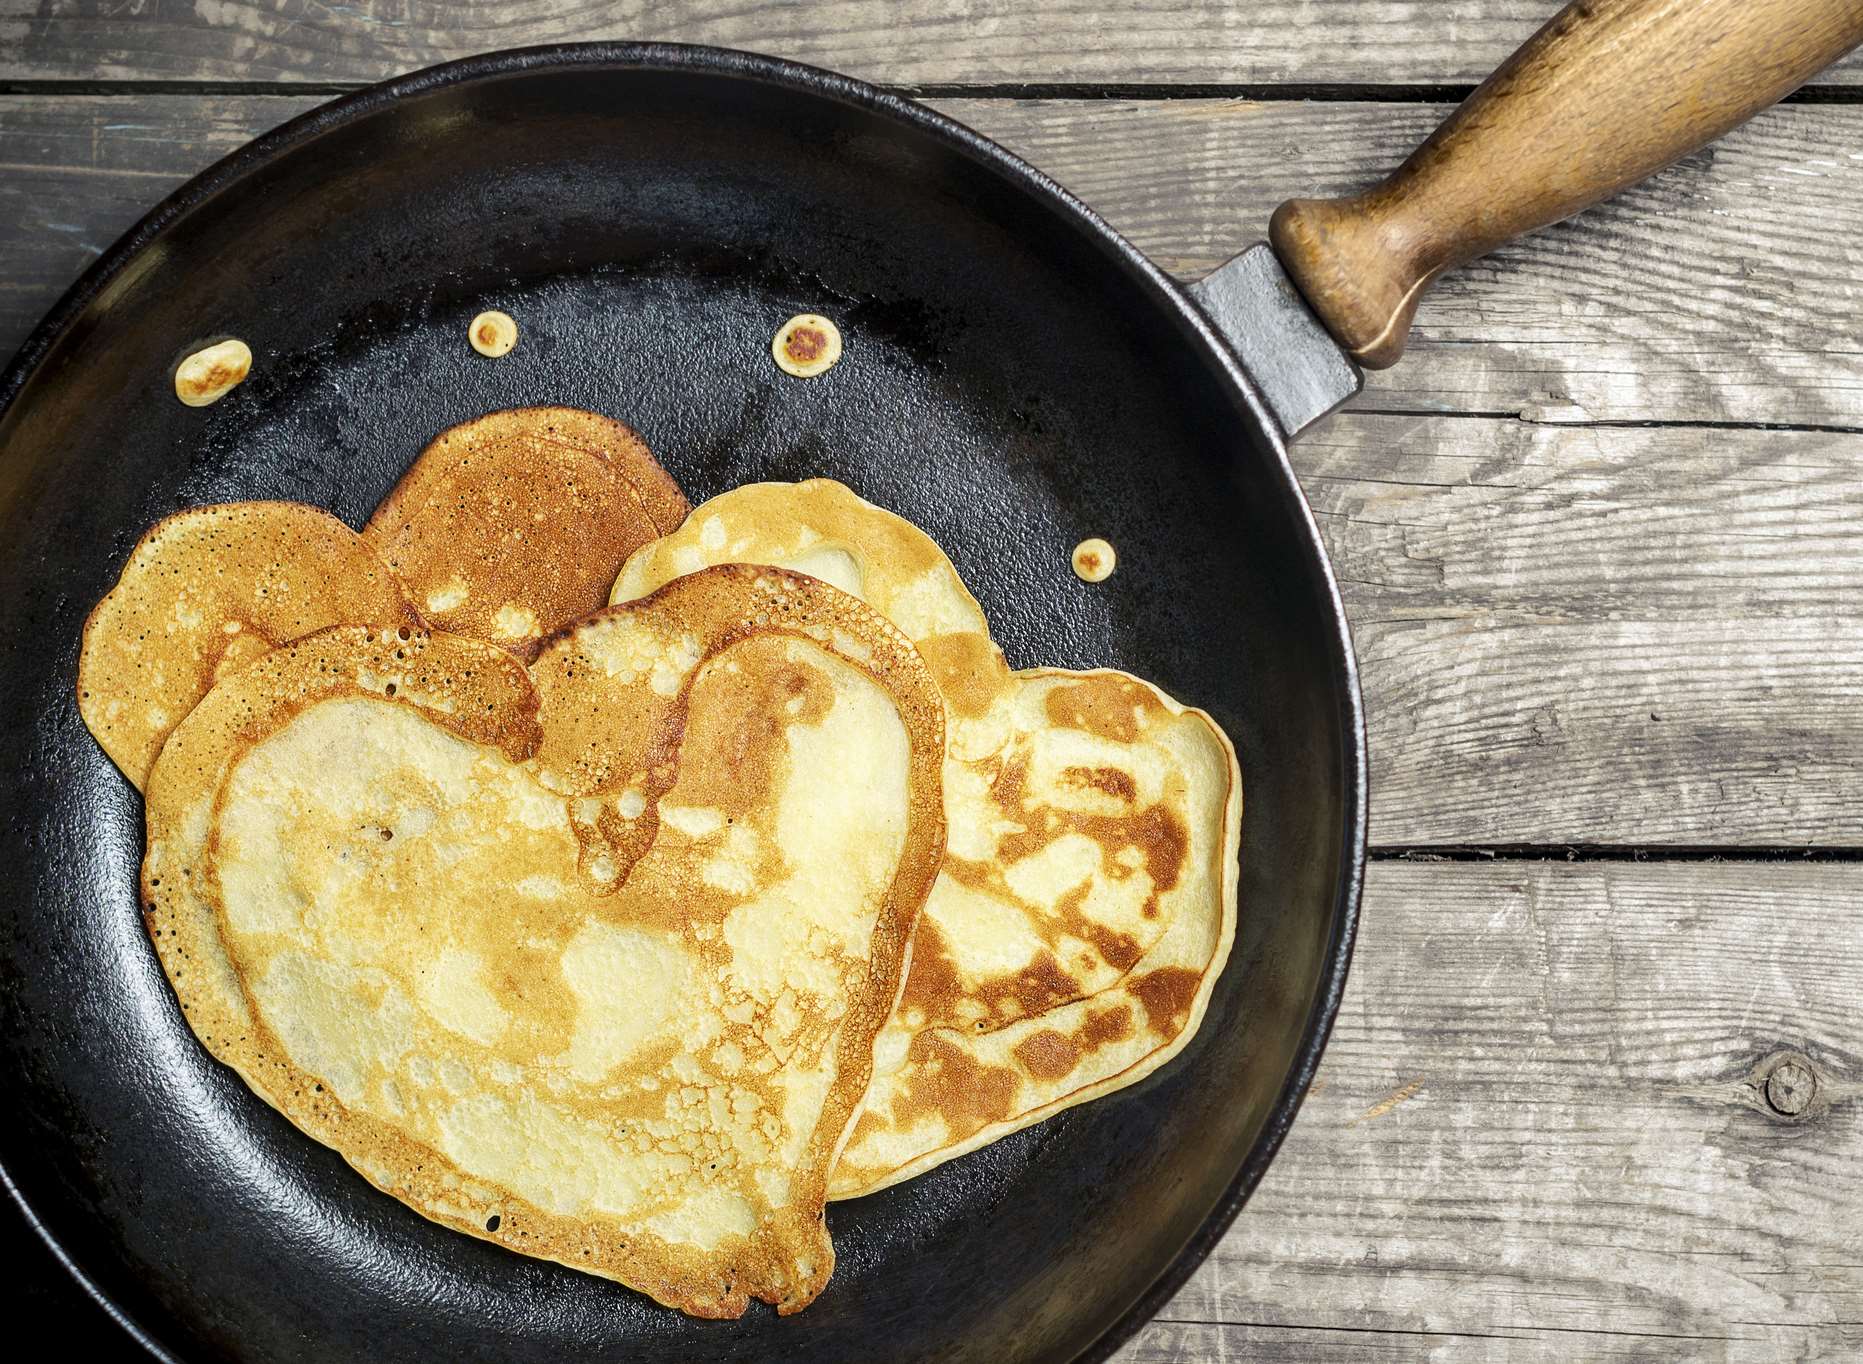 Millions of us are looking forward to making and devouring pancakes with family and friends on Shrove Tuesday